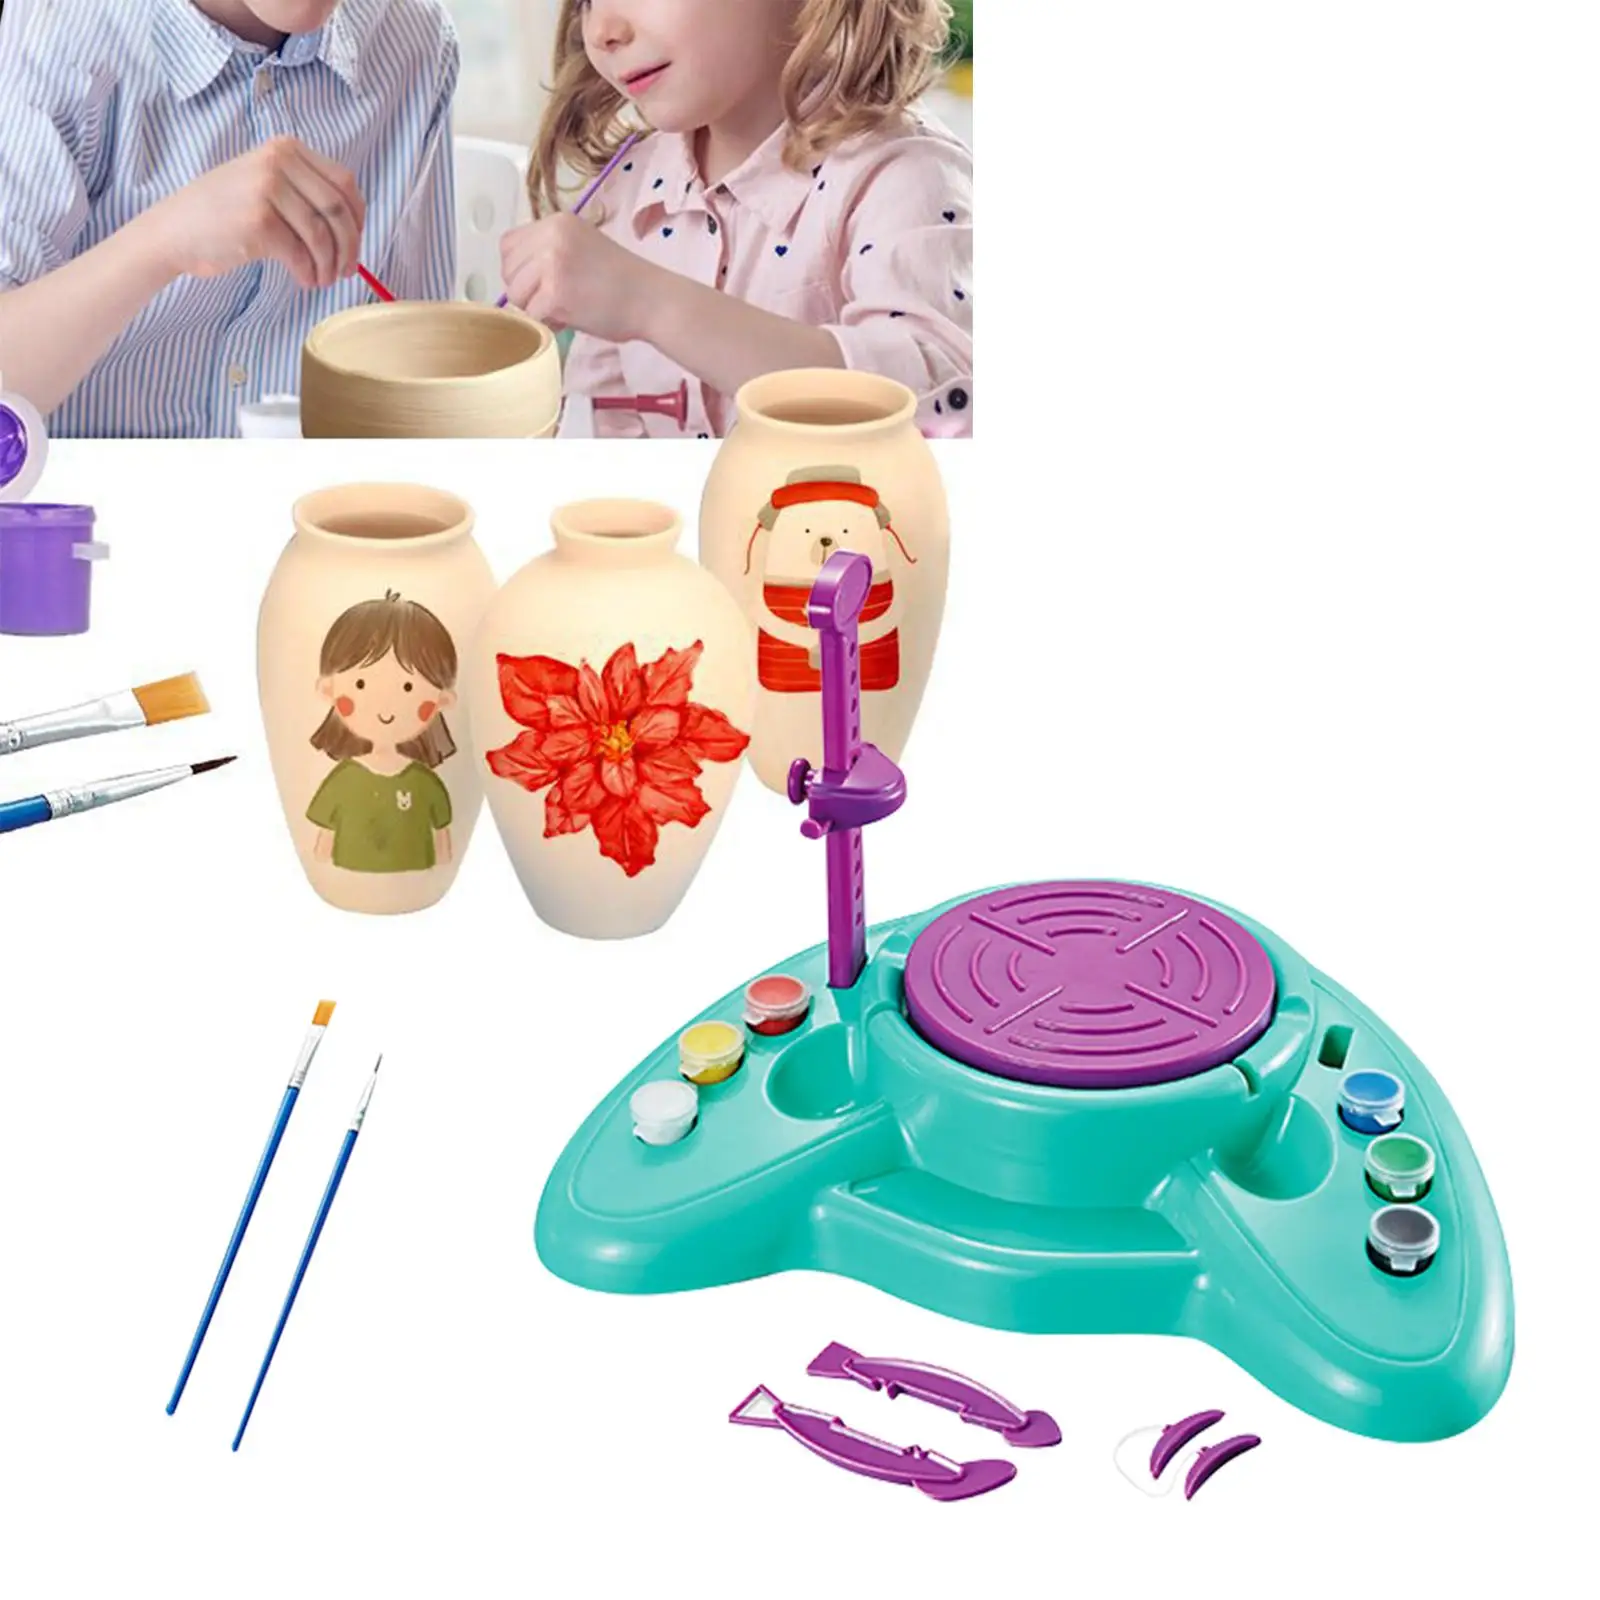 DIY Electric Pottery Machine Craft Production Machine Rotation Clay Ceramic Forming Craft Ceramic Clay Pottery Kit for Girls